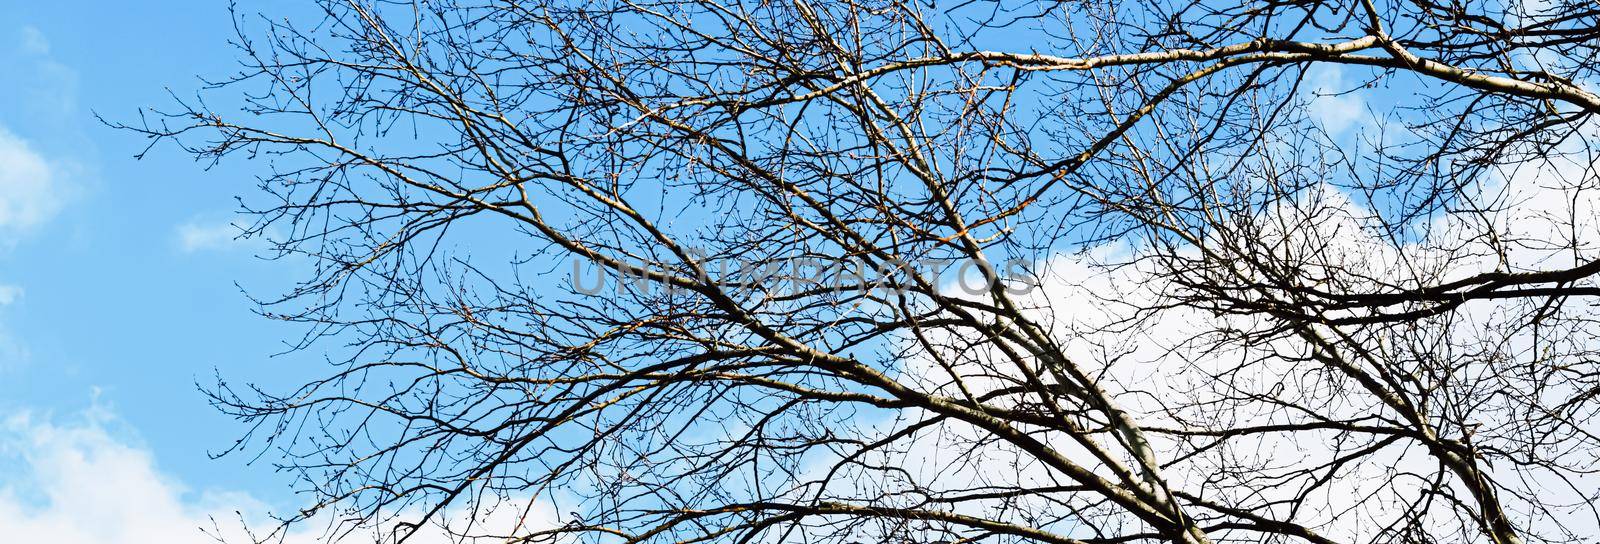 Tree and blue sky in early spring or autumn, nature background by Anneleven